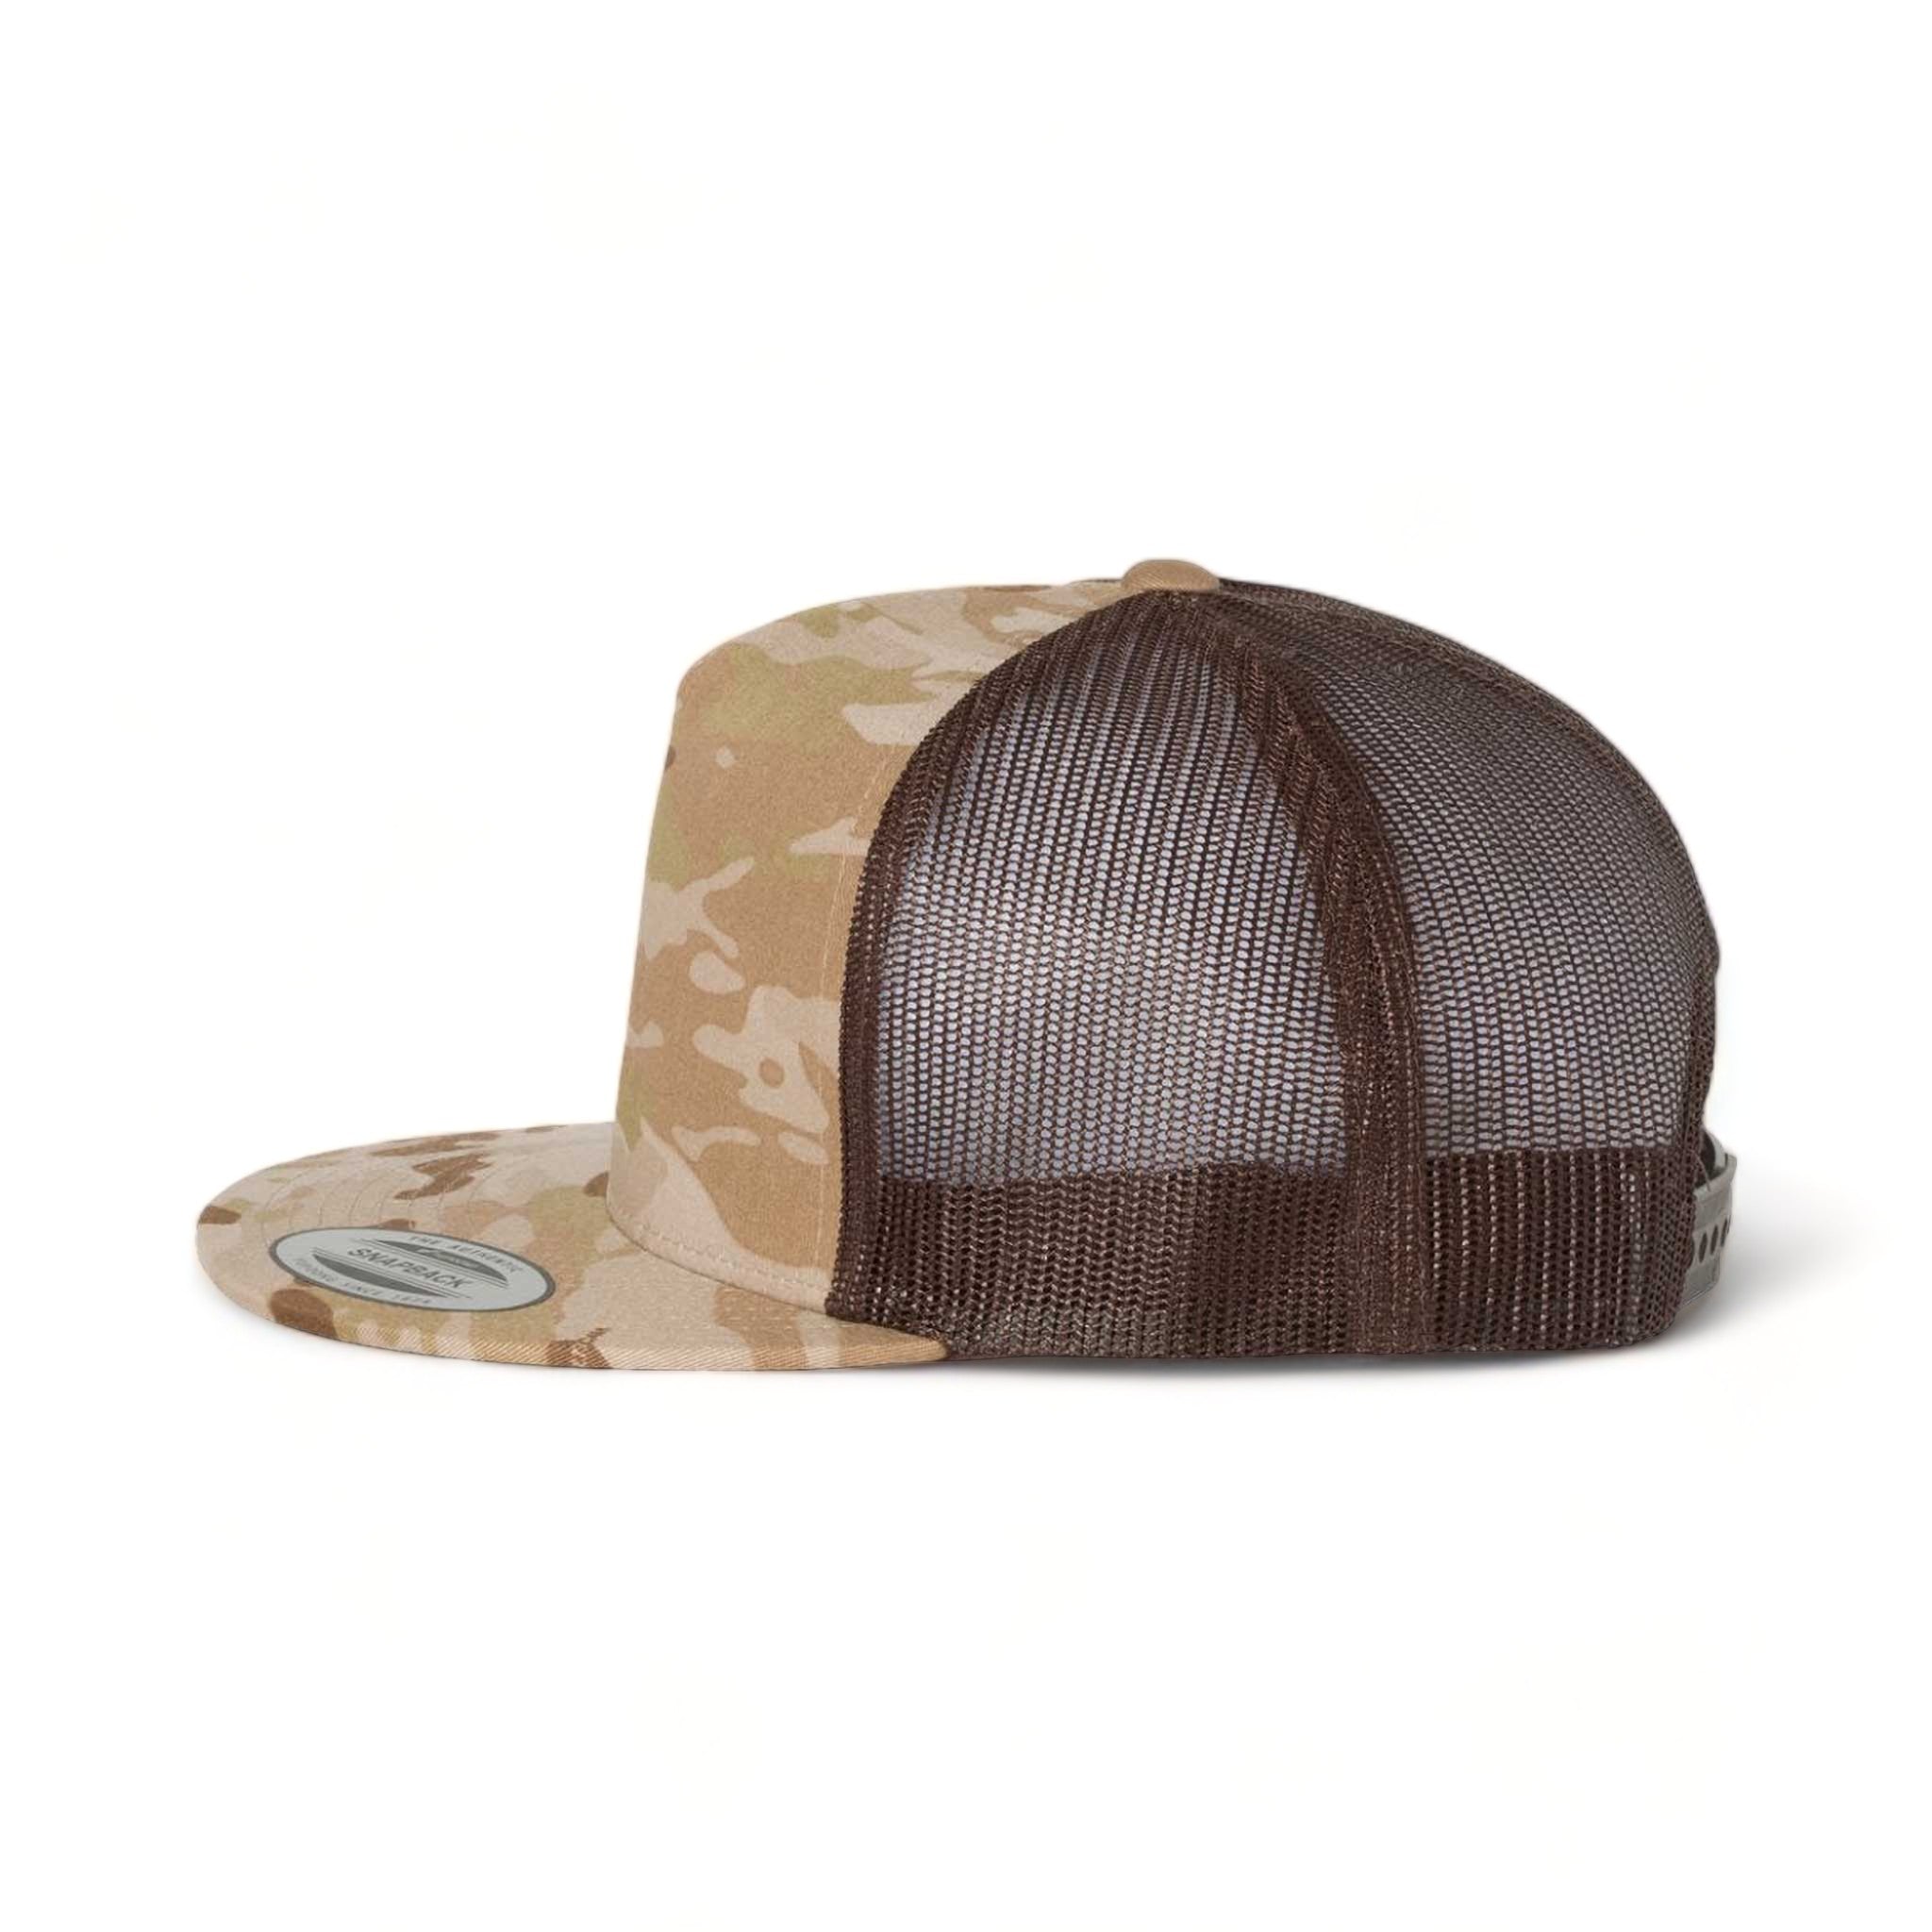 Side view of YP Classics 6006 custom hat in multicam arid and brown